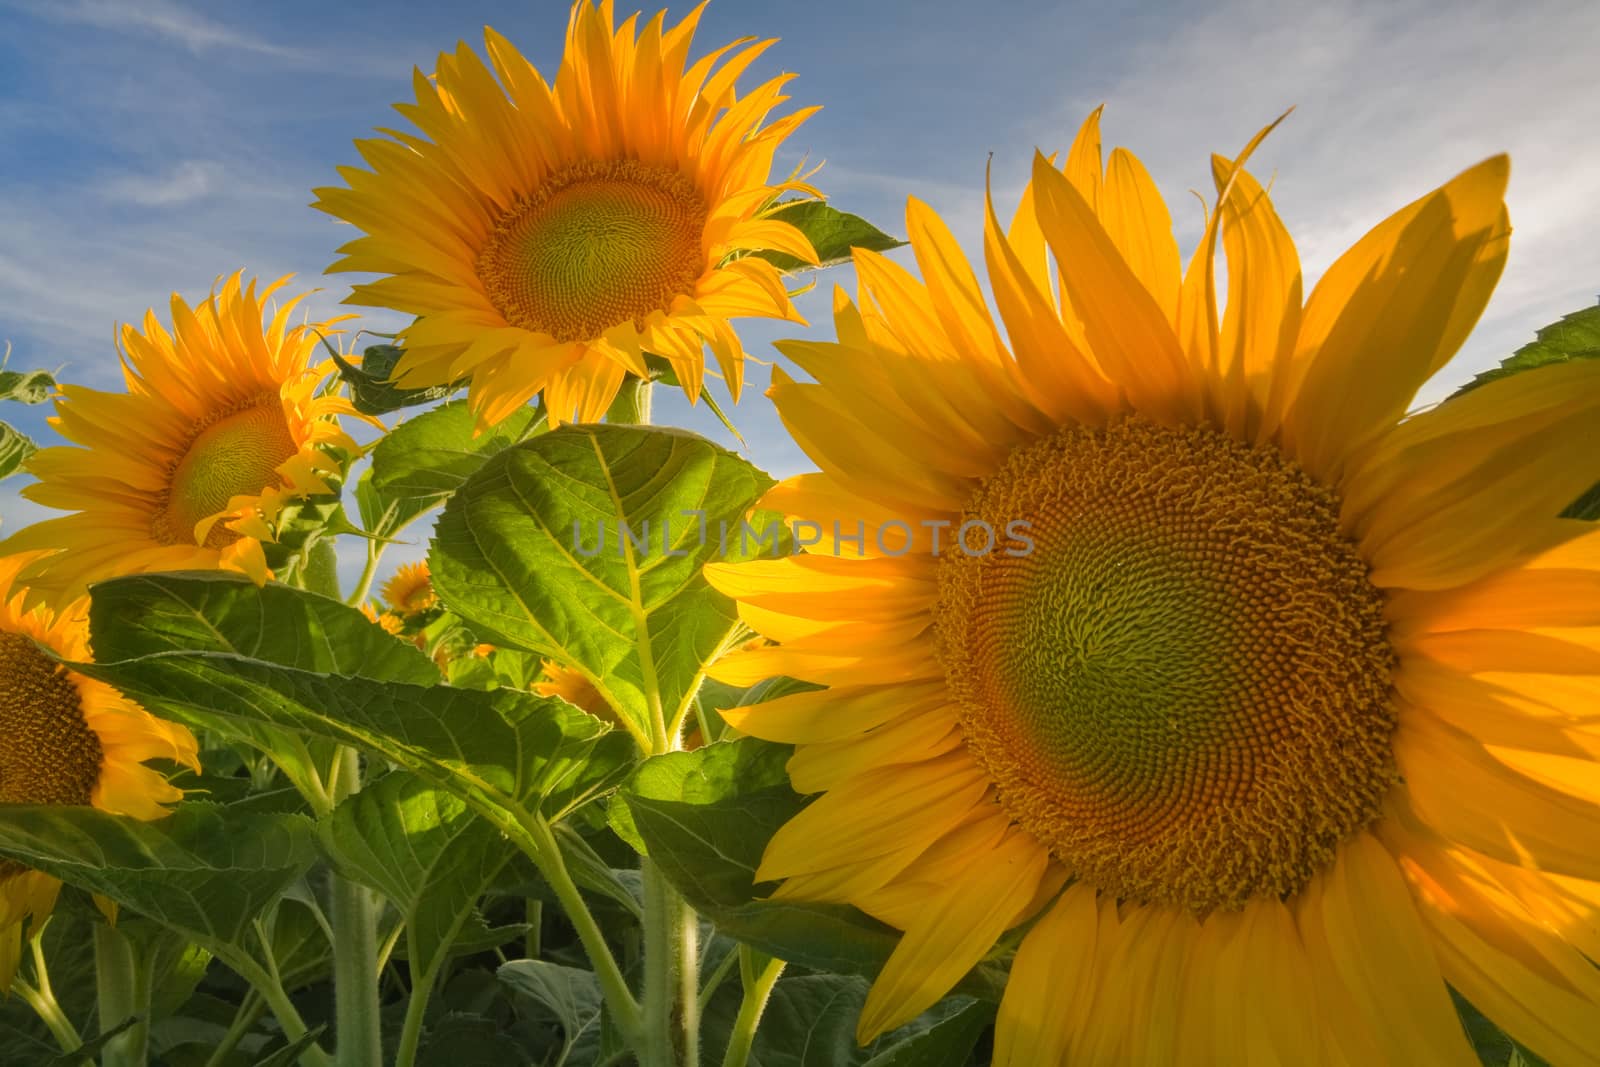 Sunny Sunflowers in Davis by adonis_abril